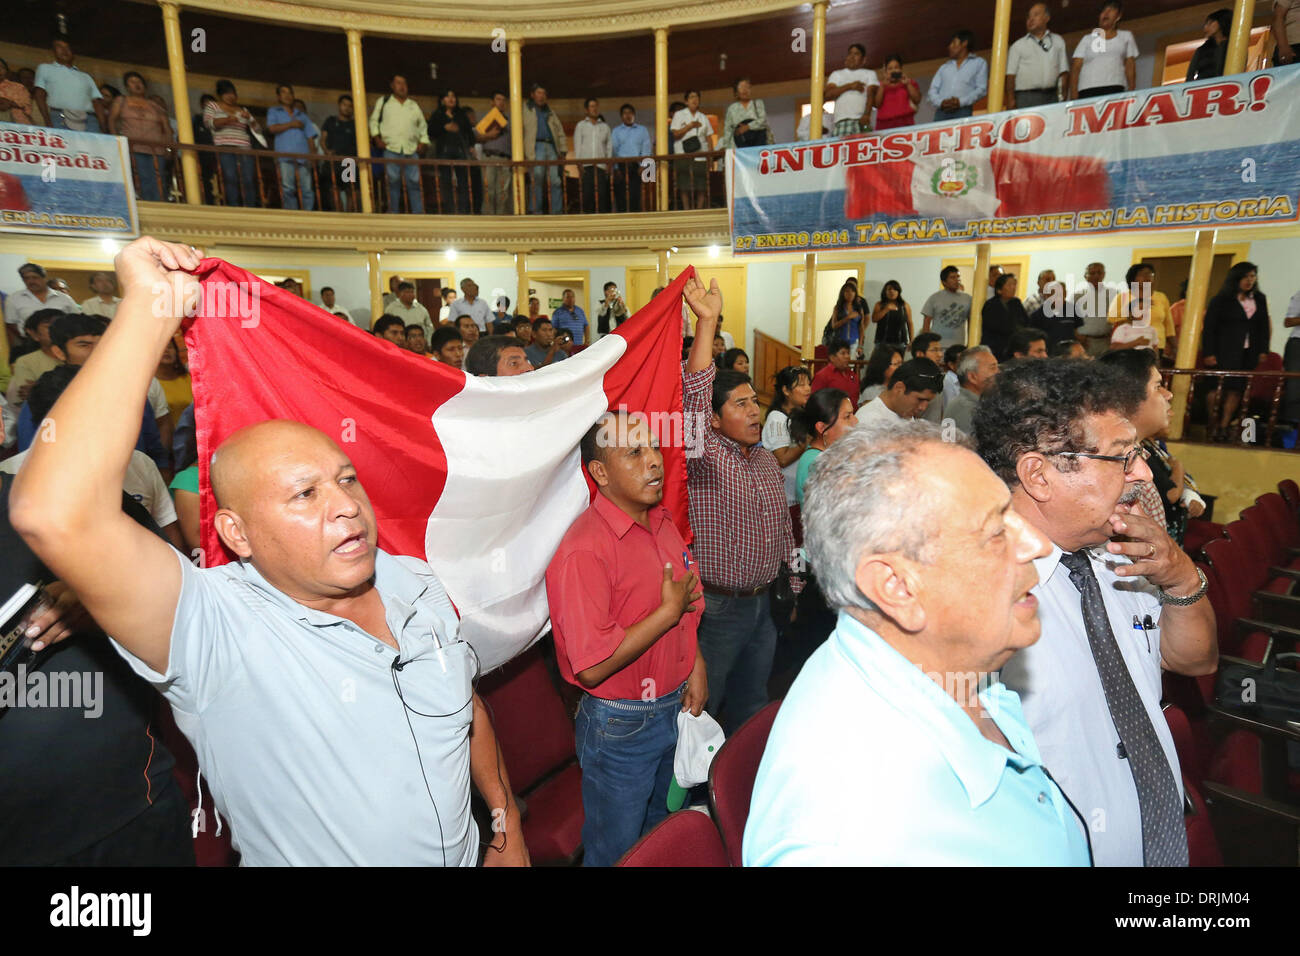 Tacna, Peru. 27th Jan, 2014. Residents celebrate after the decision of the International Court of Justice (ICJ) about the maritime dispute with Chile in the Municipal Theater of Tacna, Peru, on Jan. 27, 2014. Credit:  Oscar Farje/ANDINA/Xinhua/Alamy Live News Stock Photo